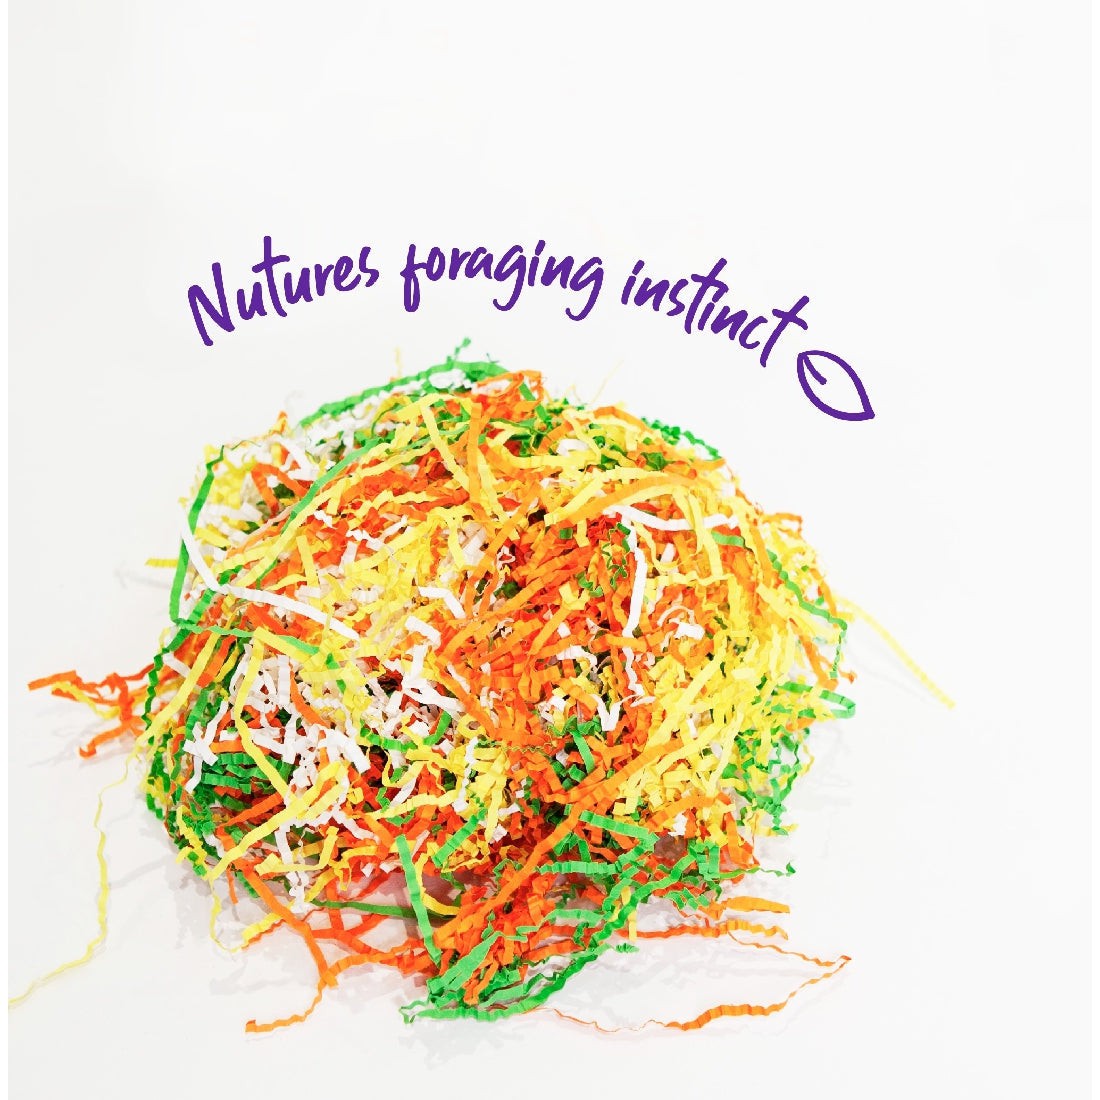 Colorful shredded paper bird toy with text "Natures foraging instinct".